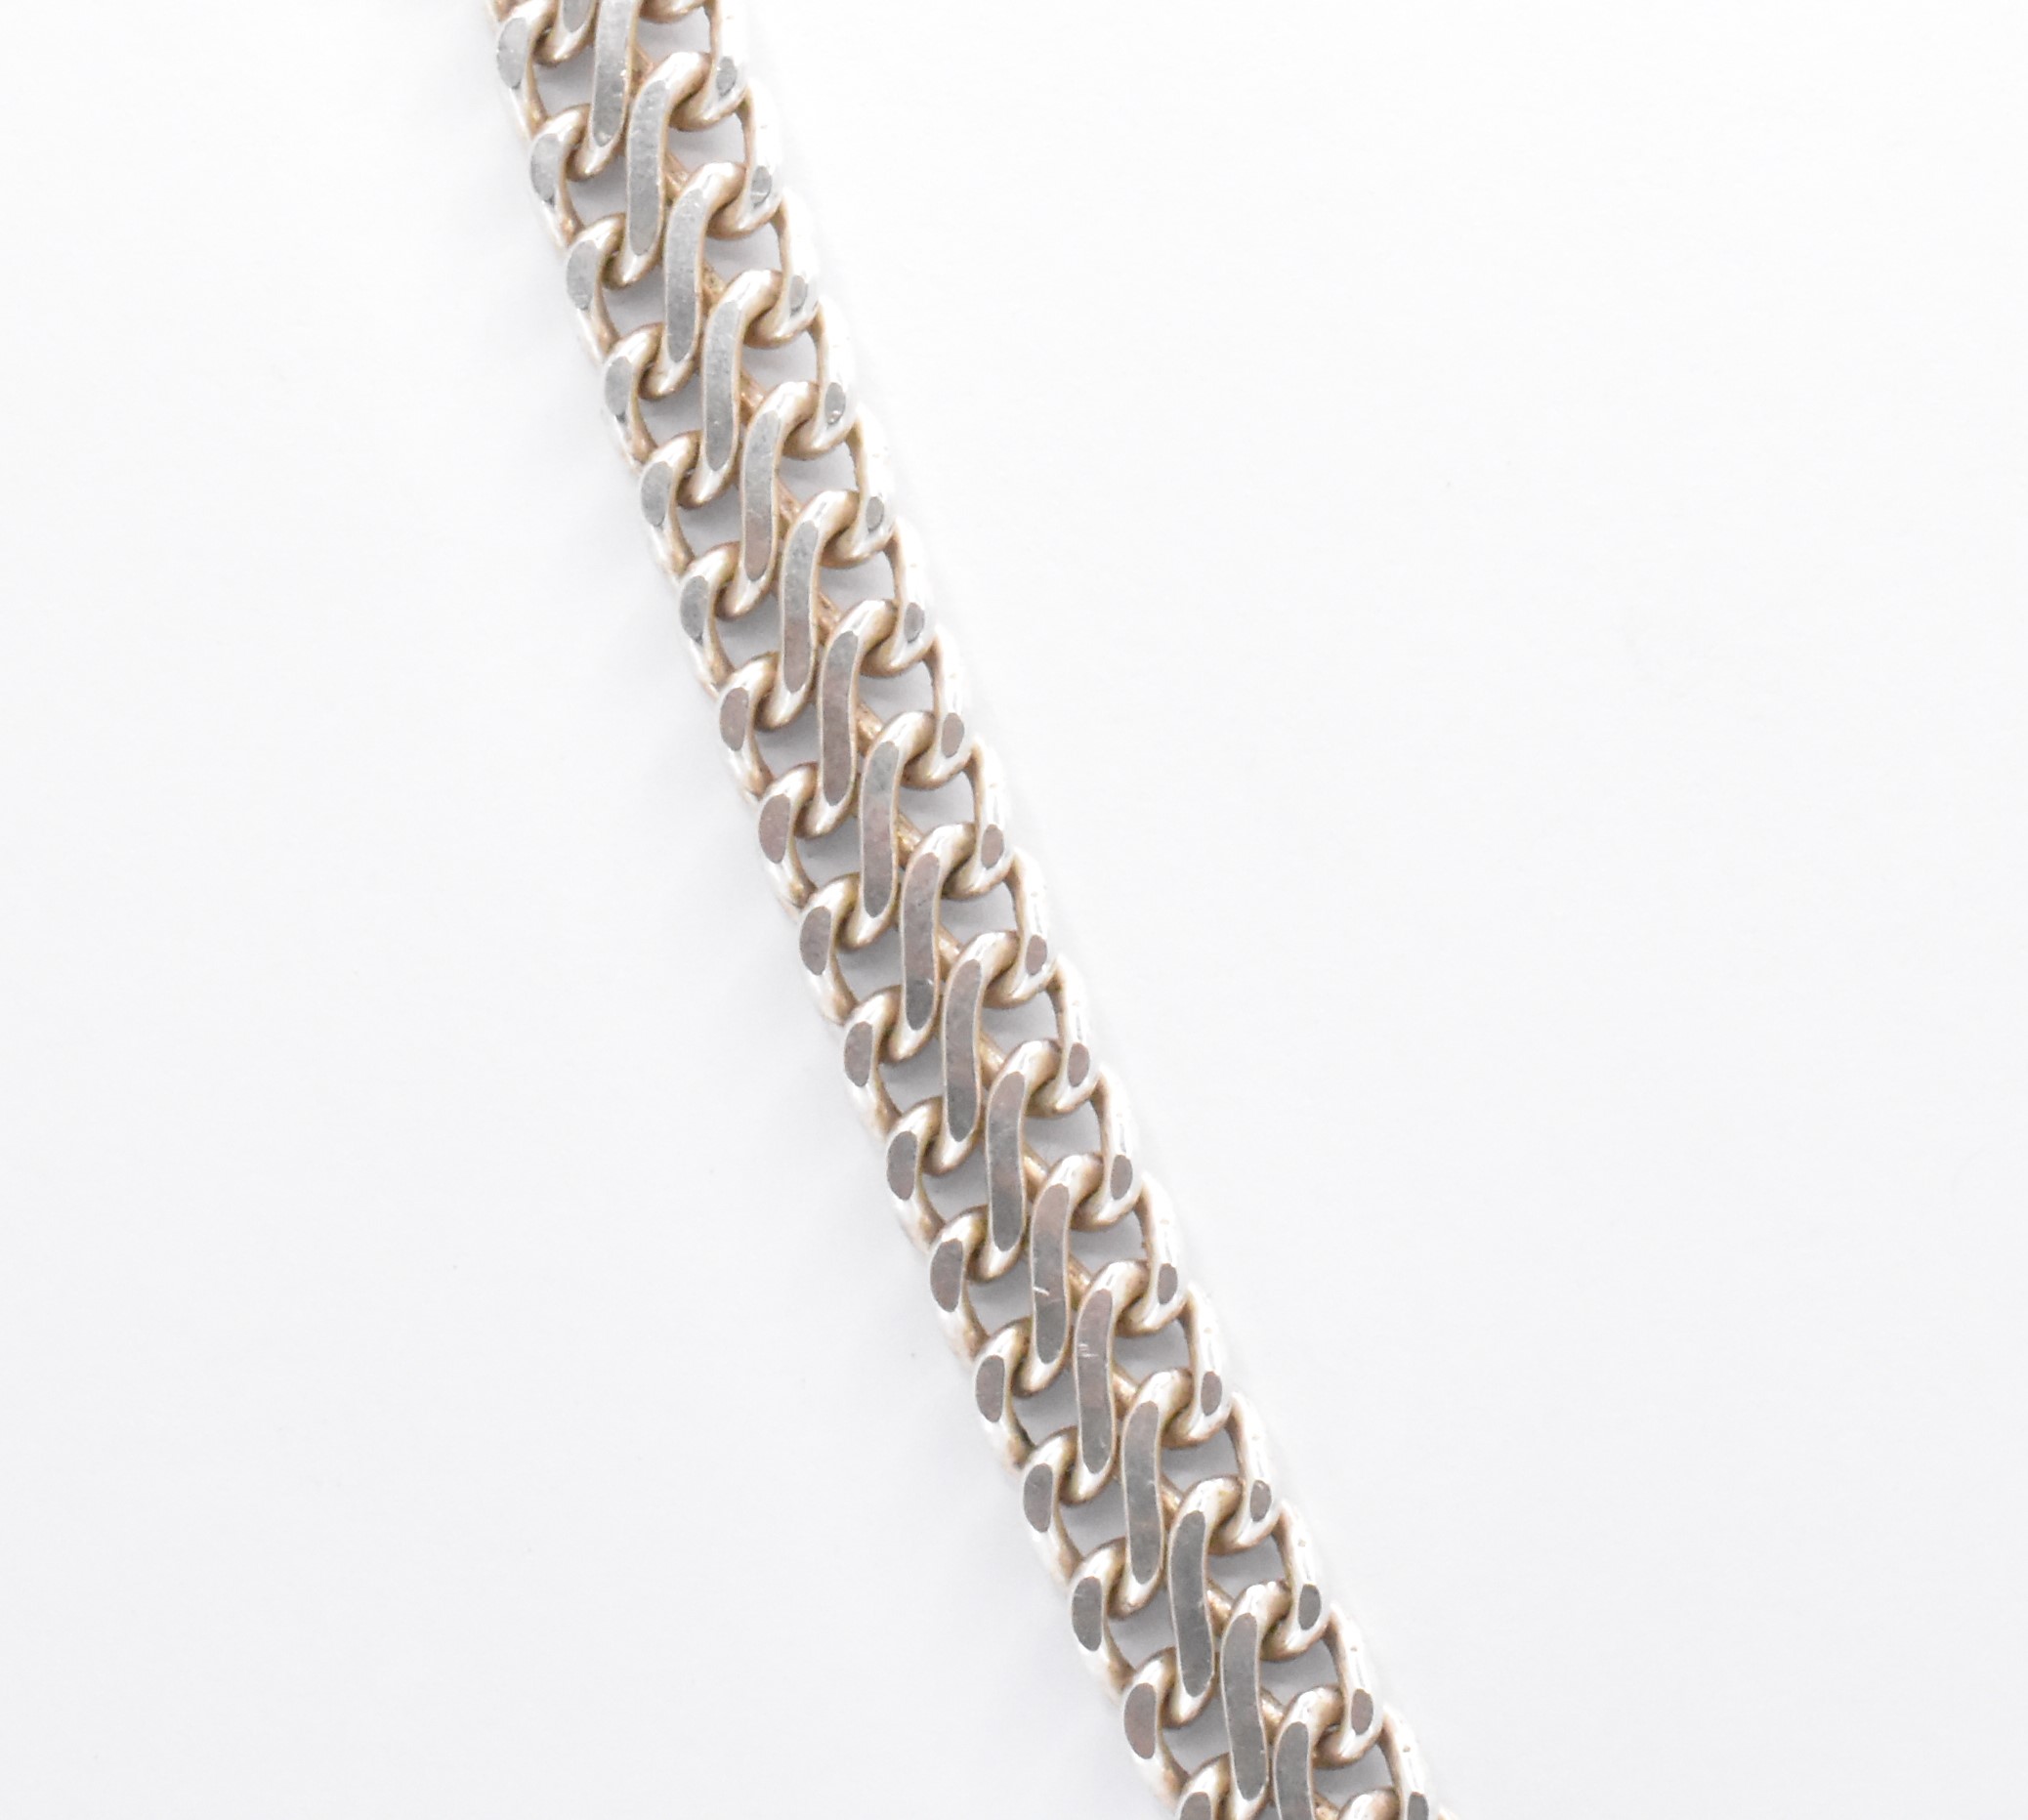 SILVER FANCY LINK NECKLACE CHAIN - Image 4 of 6